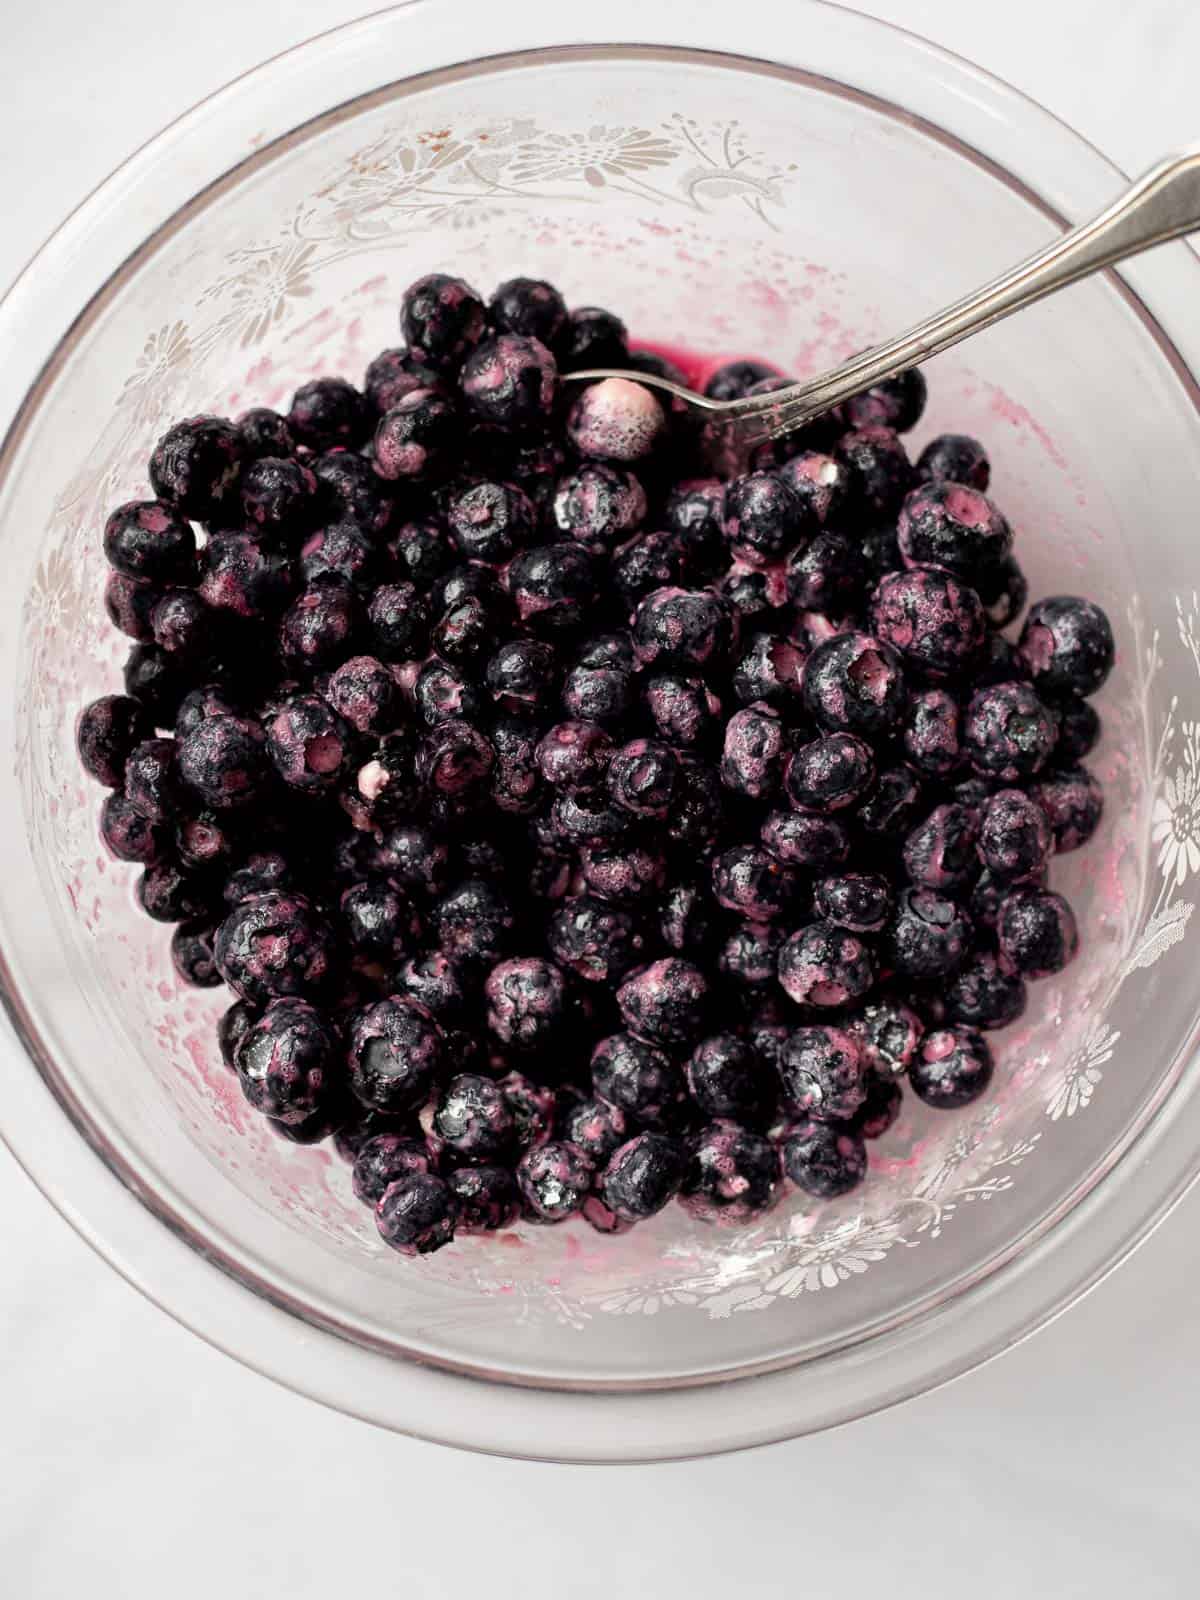 macerated blueberries in a glass bowl with a silver spoon.